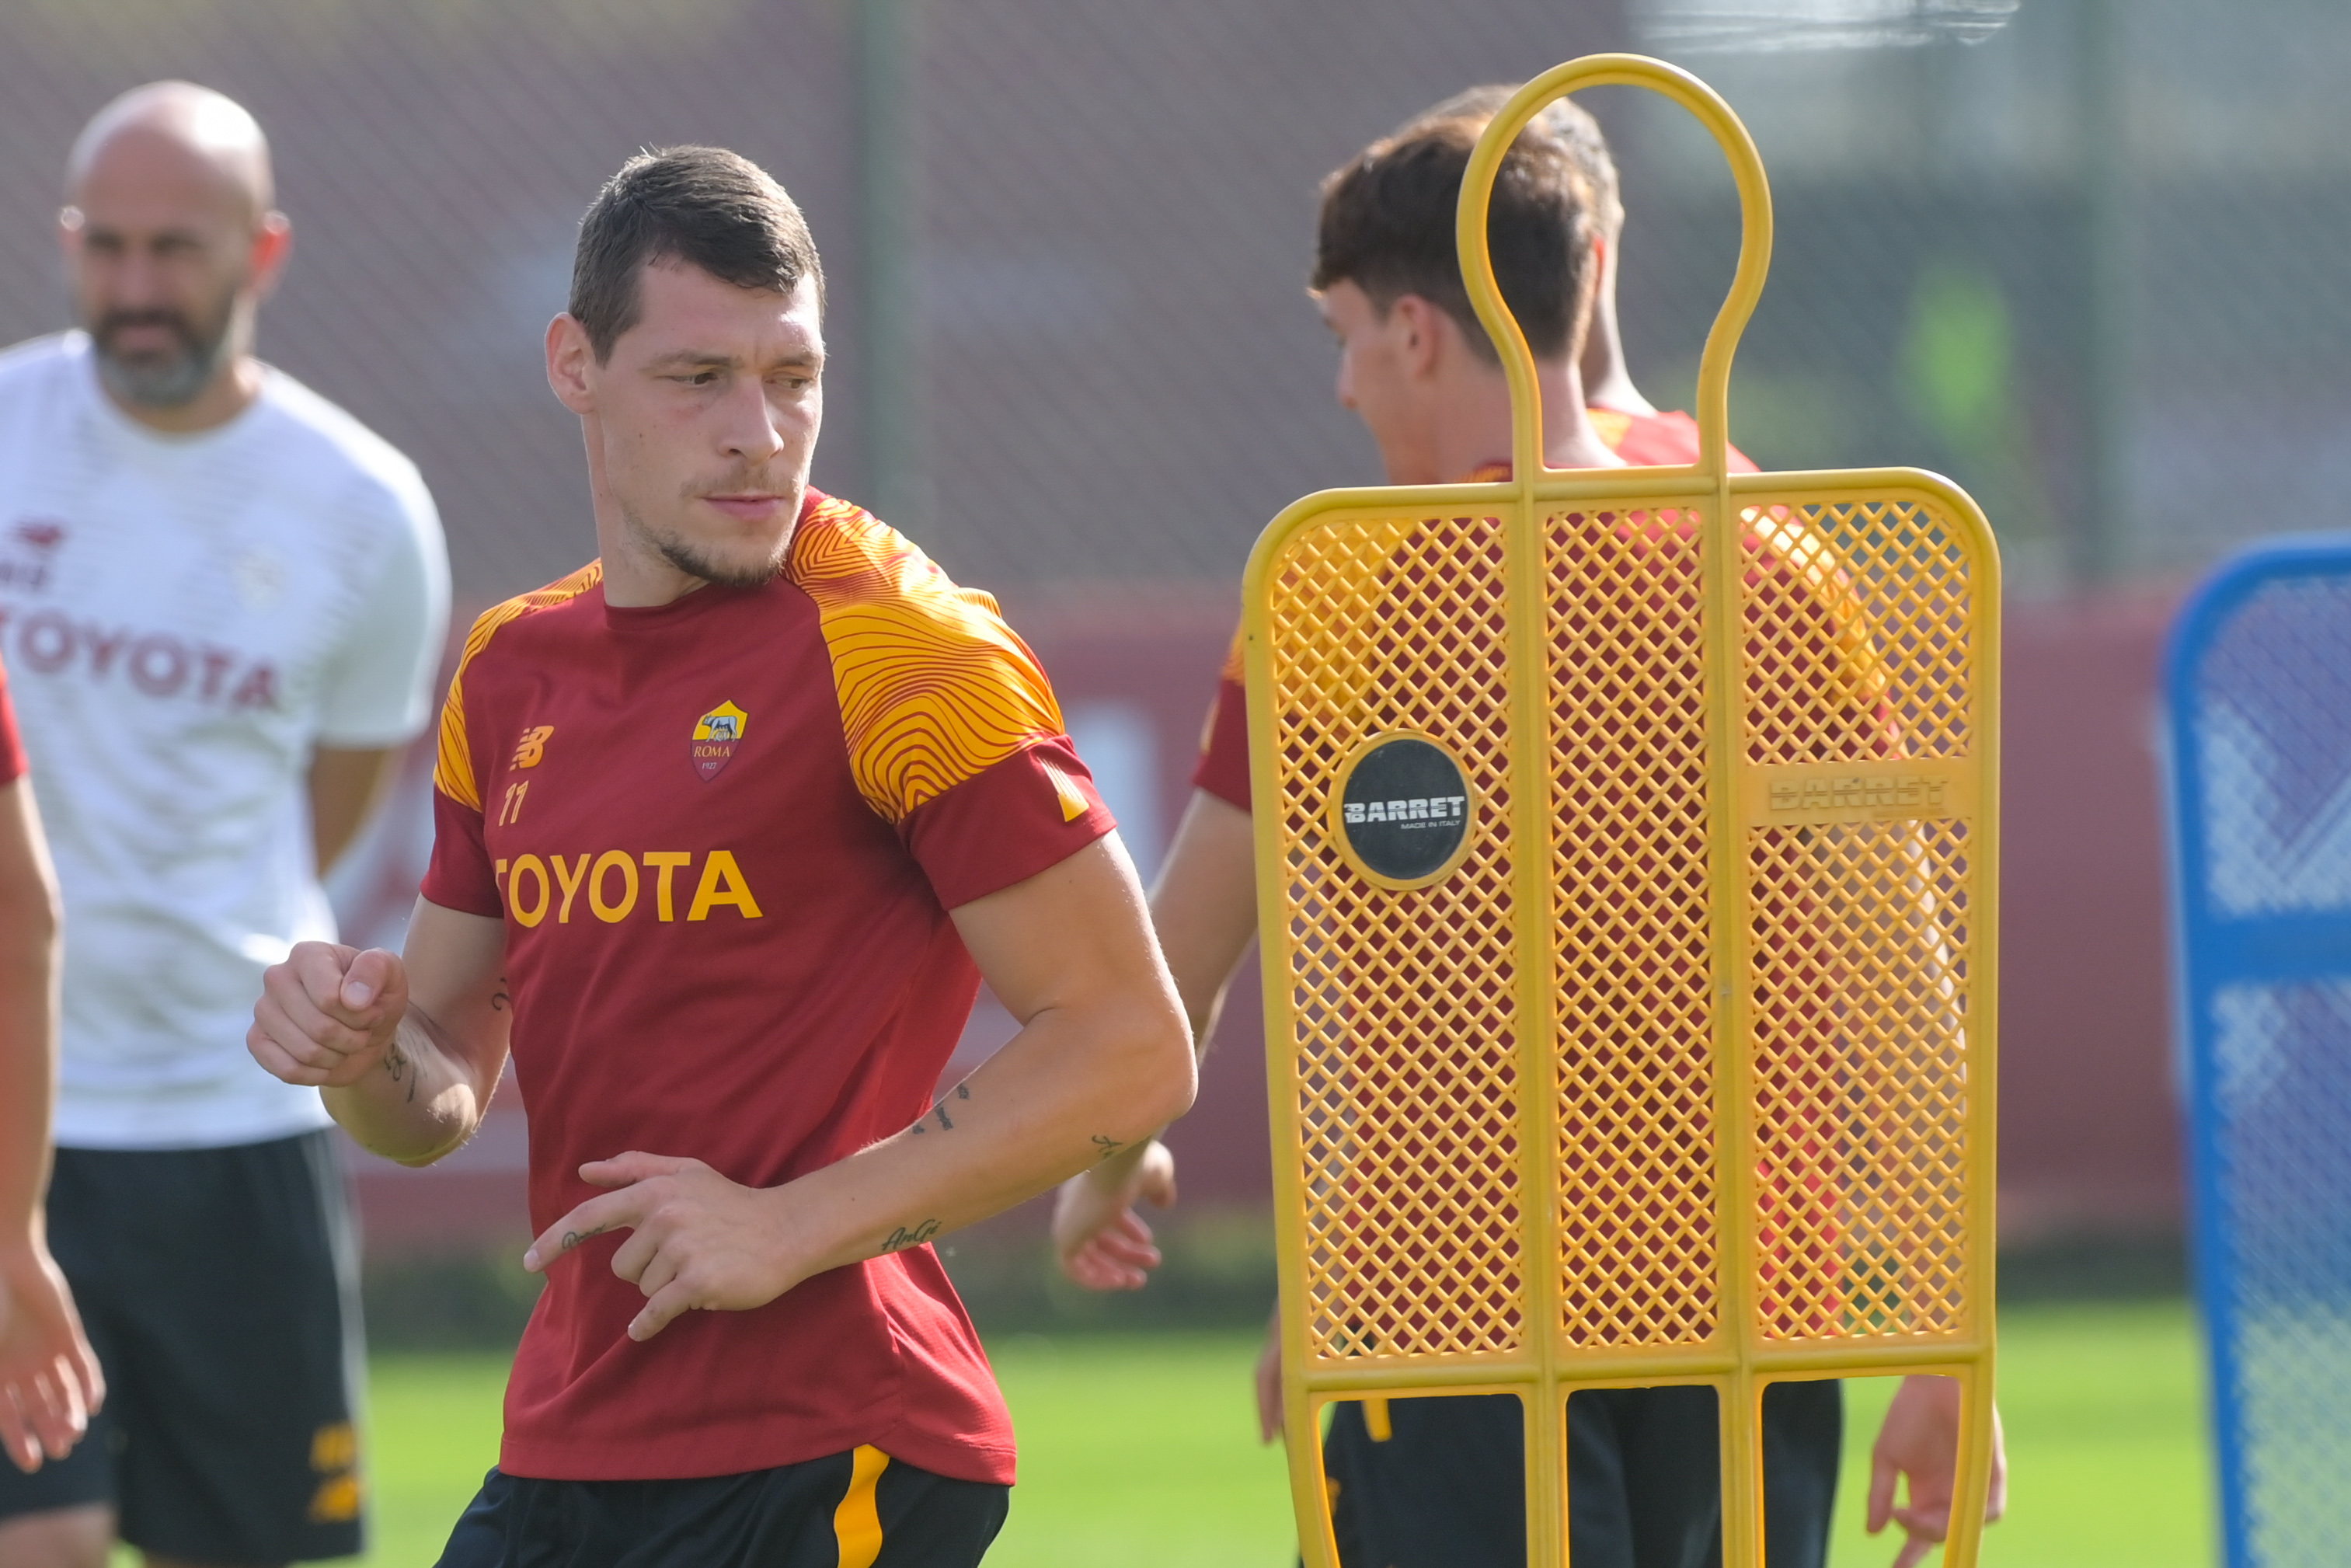 Belotti (As Roma via Getty Images)